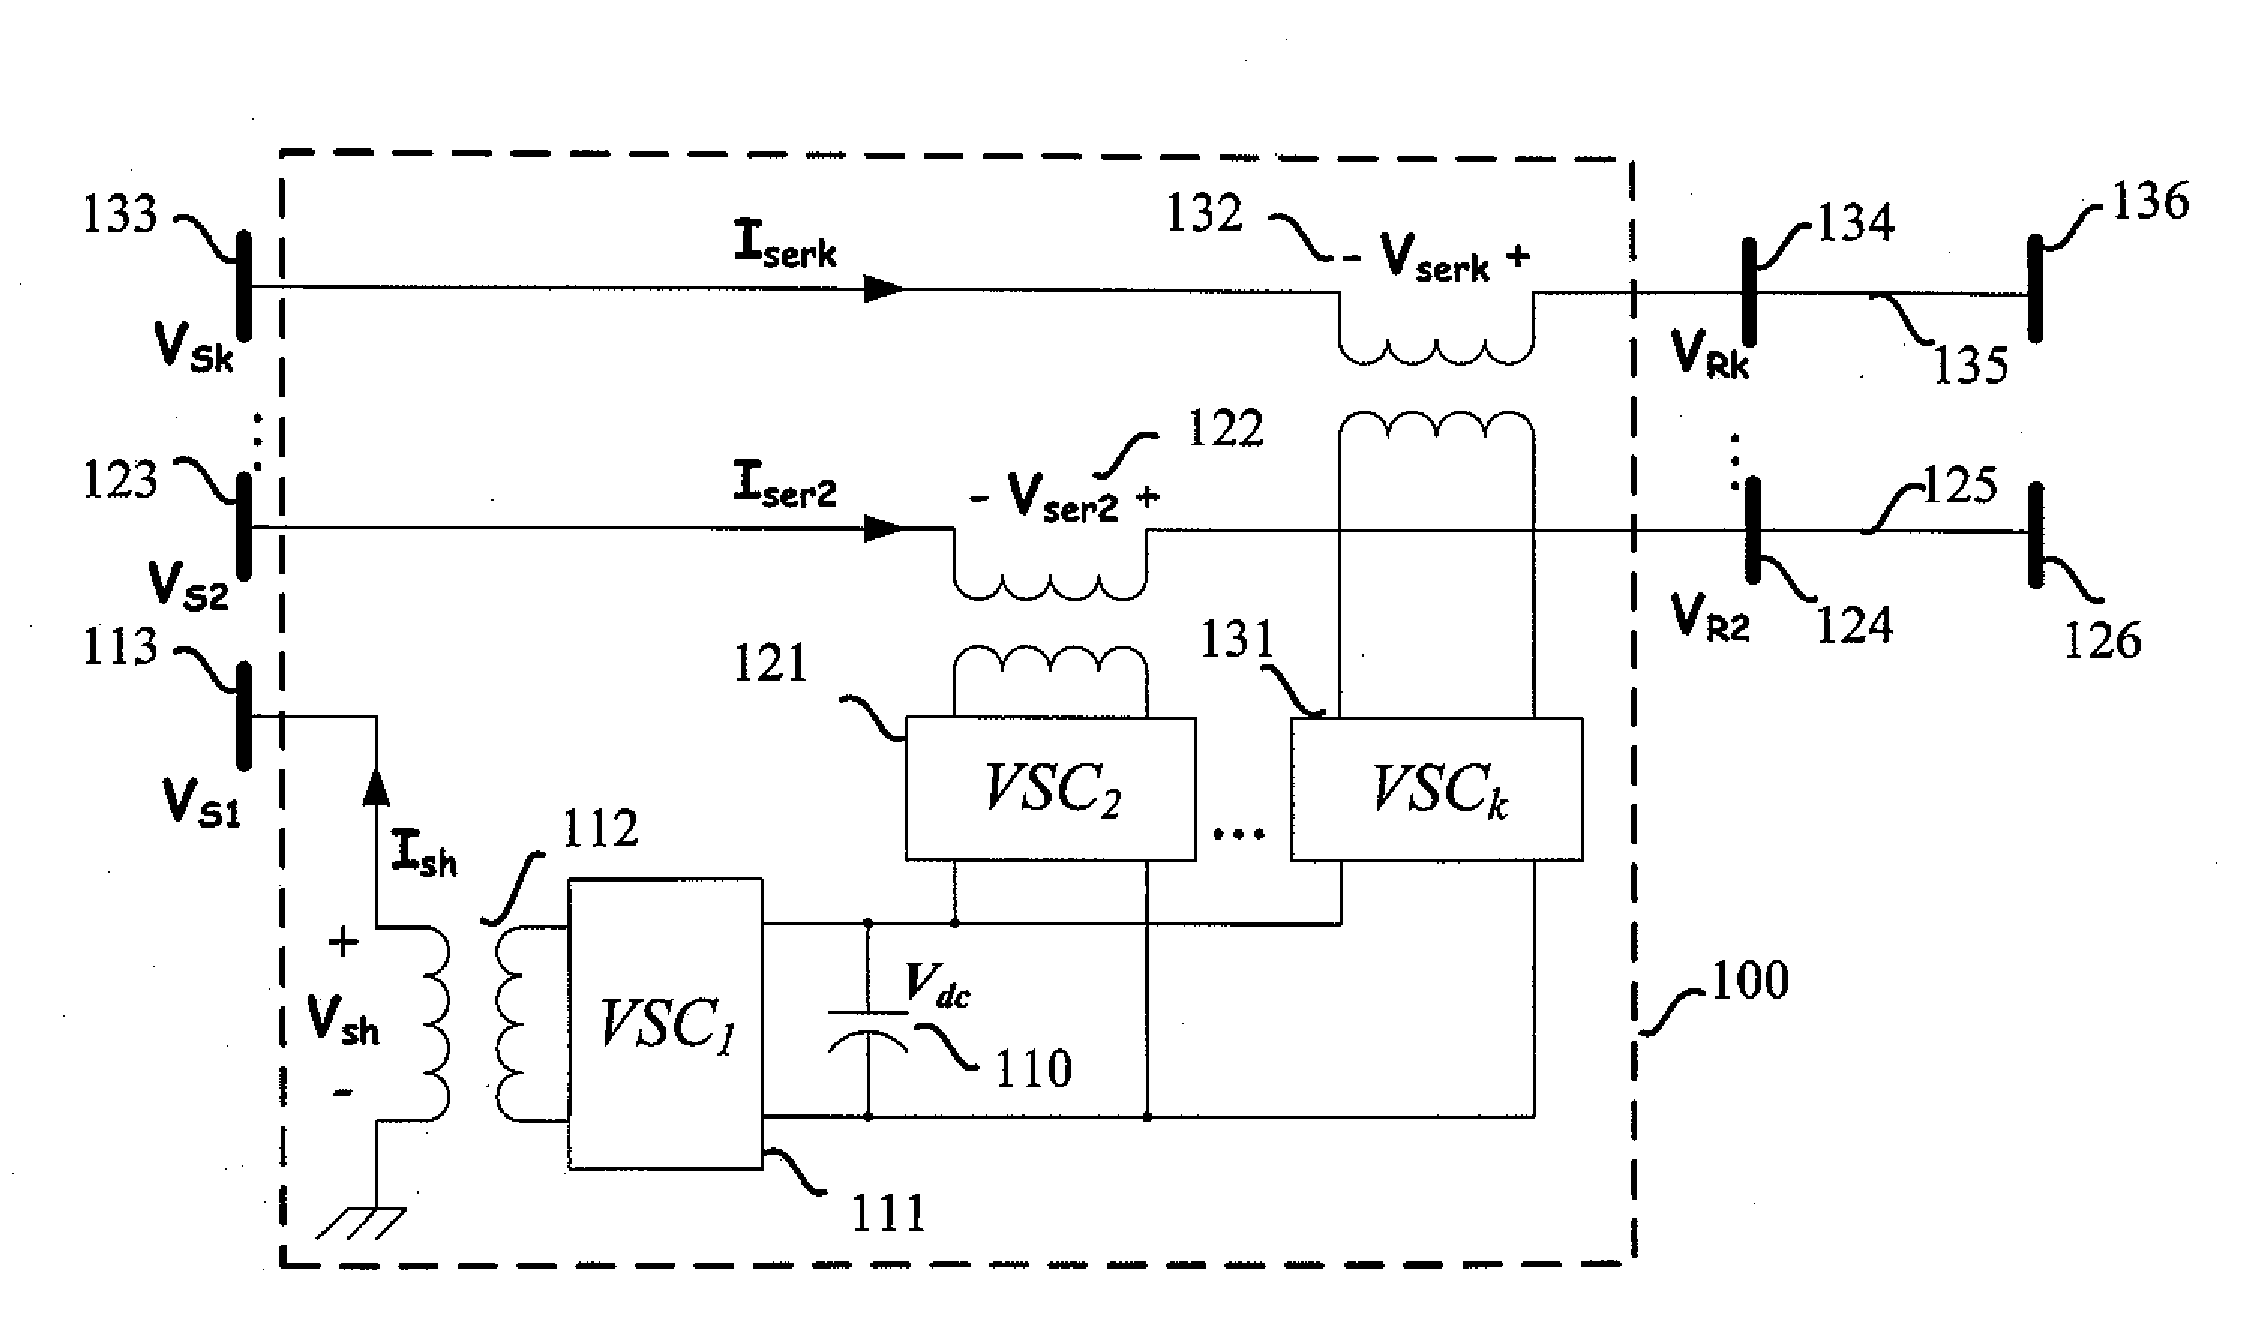 Method of Calculating Power Flow Solution of a Power Grid that Includes Generalized Power Flow Controllers